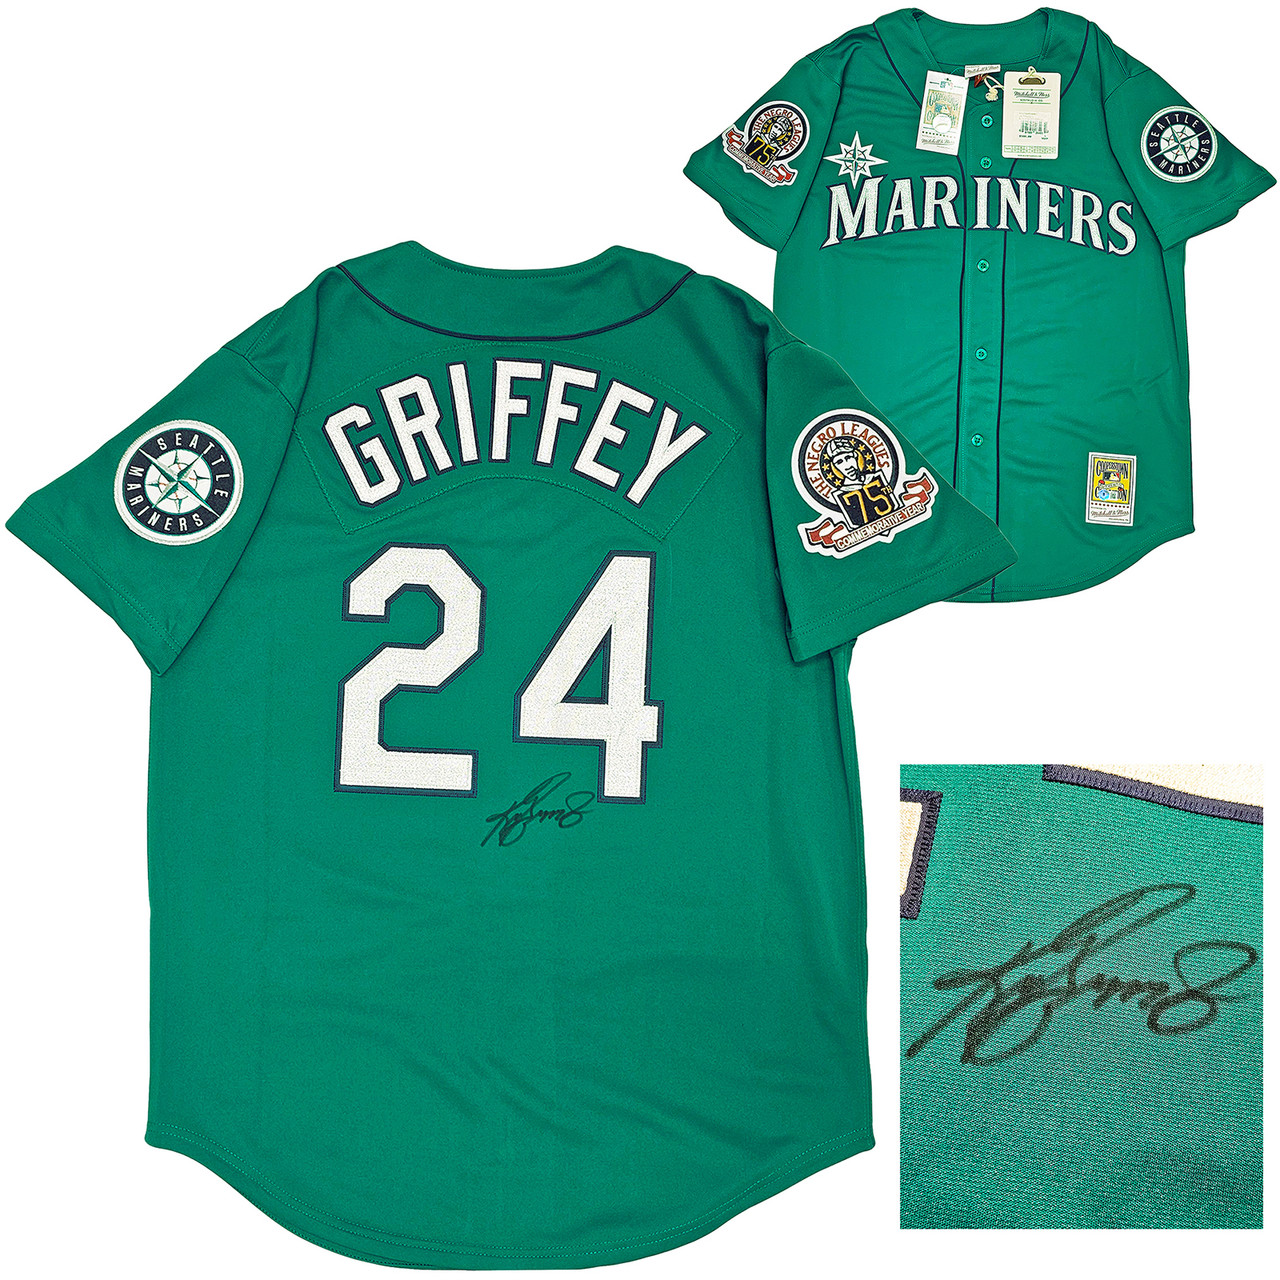 My Ken Griffey Mariners Collection. All AUTHENTIC!!!! And my 2 fav